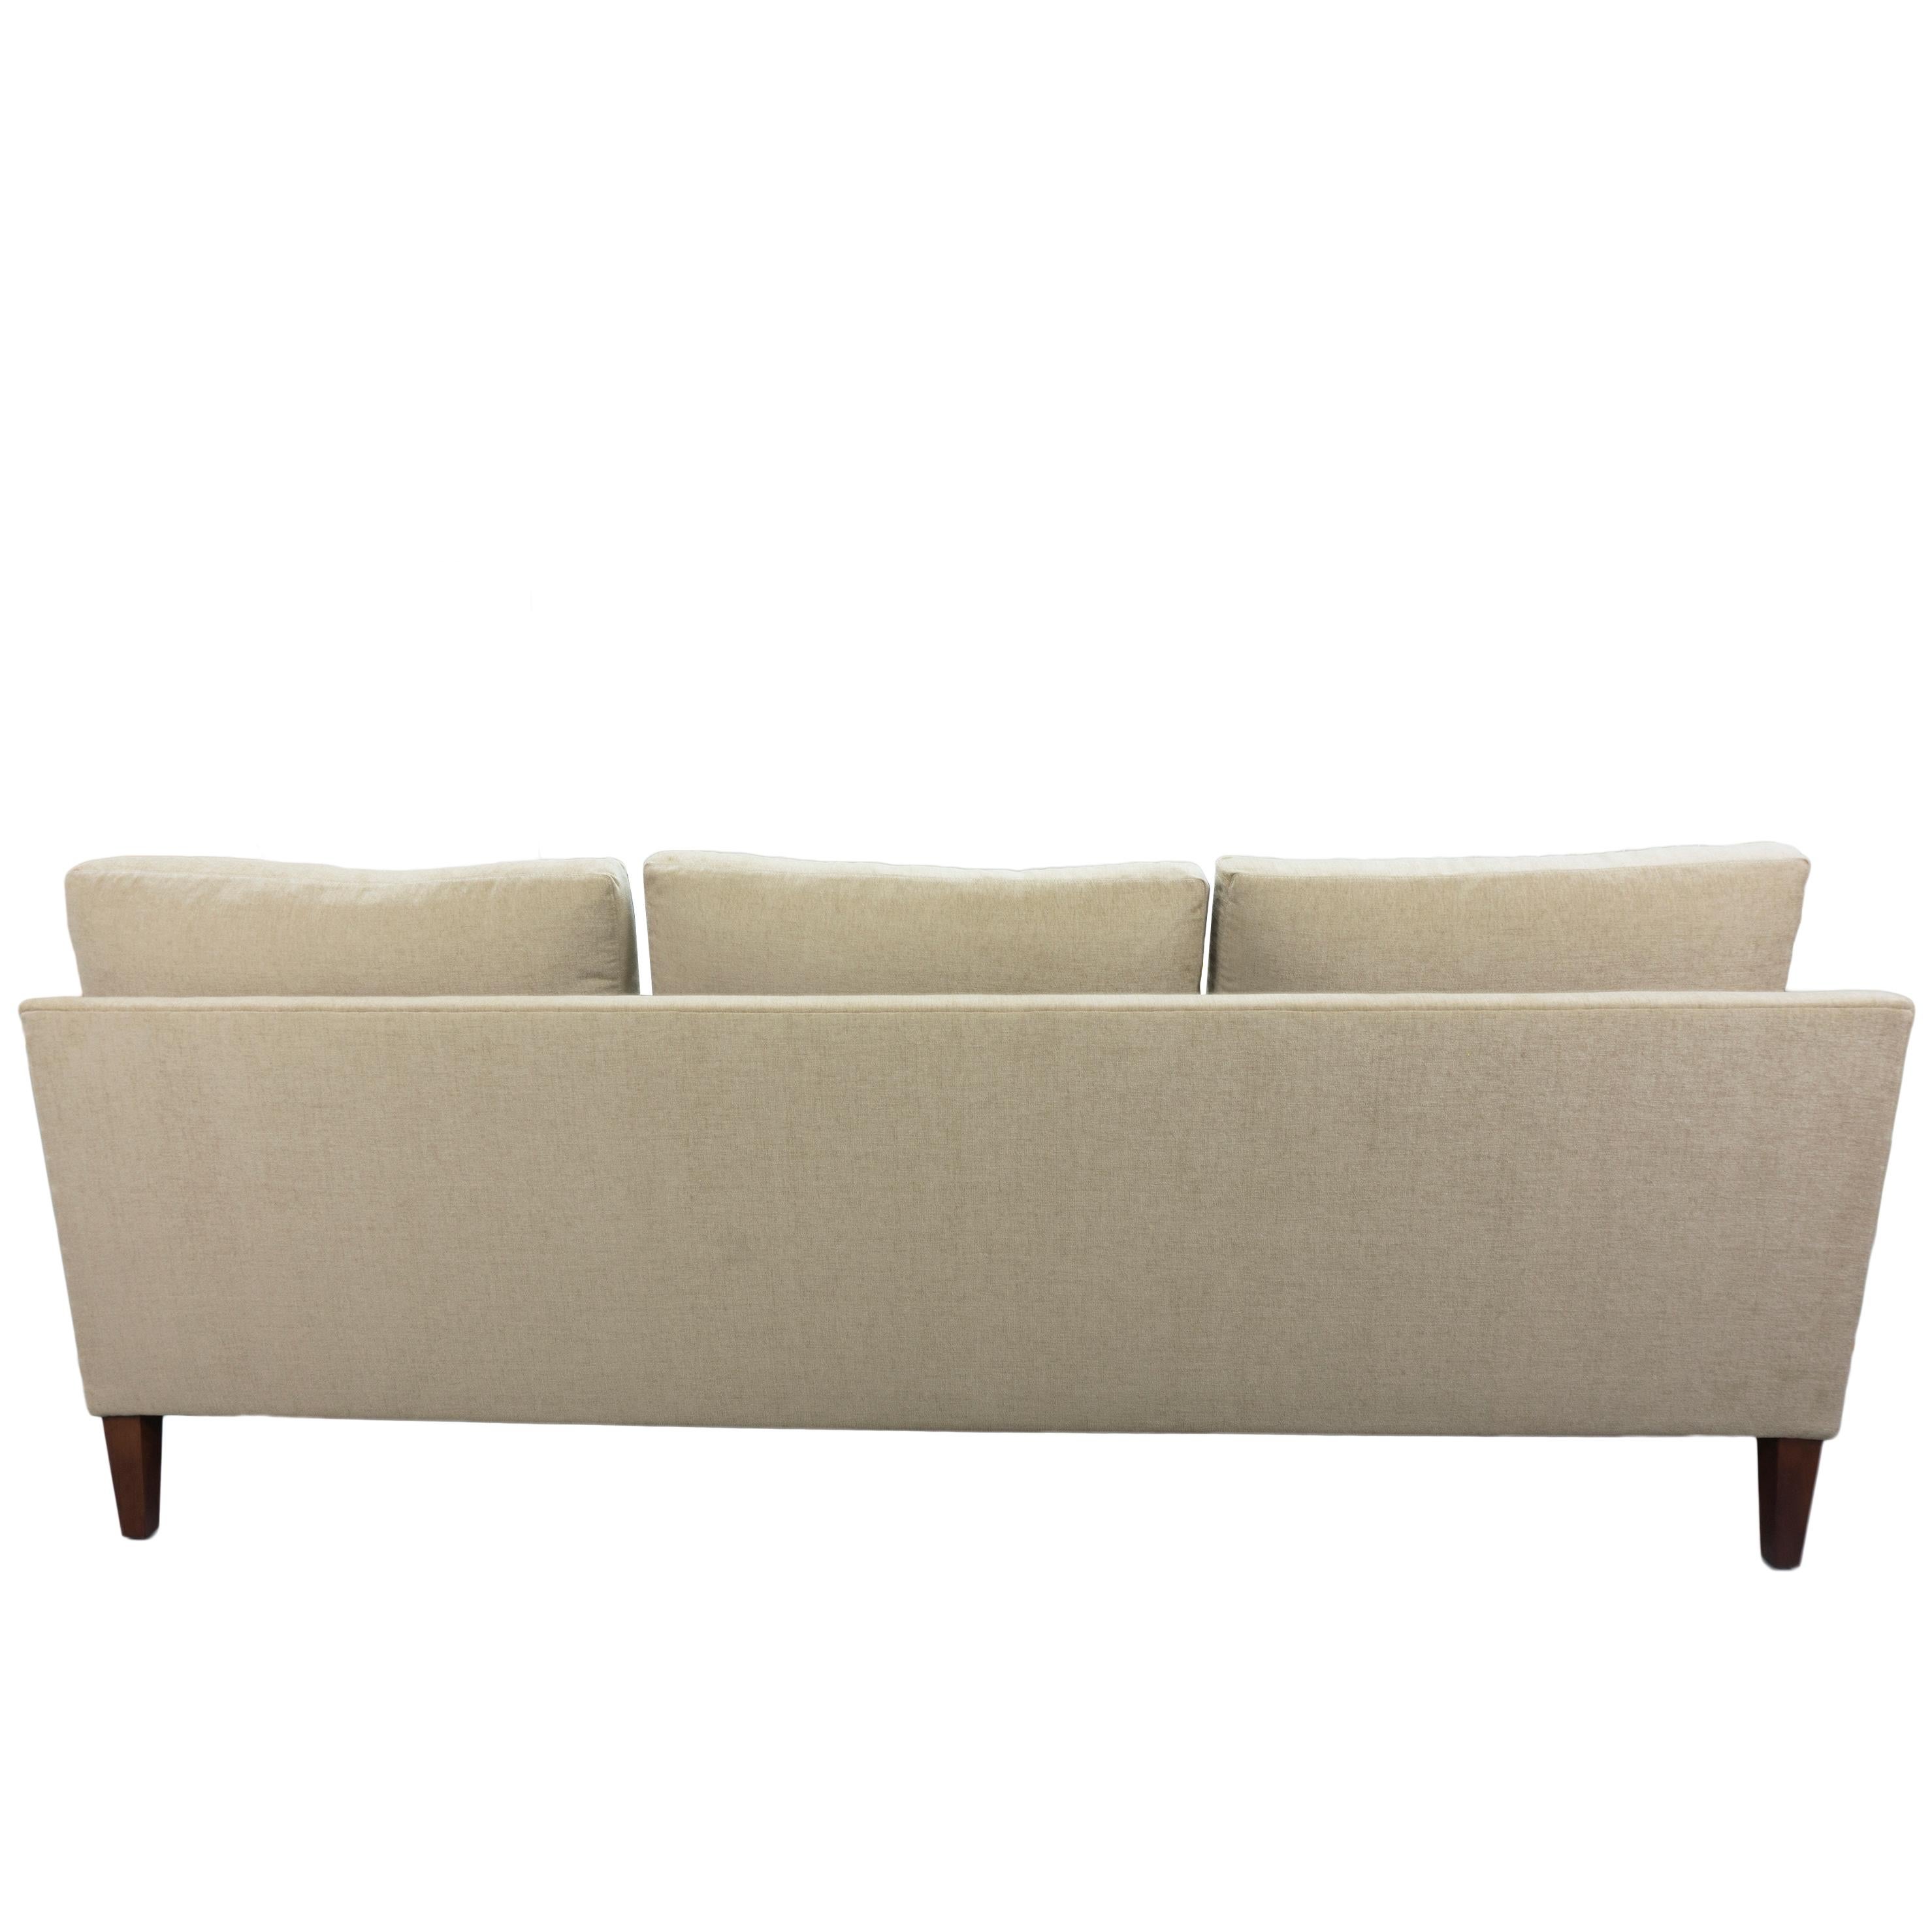 Wood Large Angled Sectional with Loose Cushions and Slope Arms, Custom Built For Sale